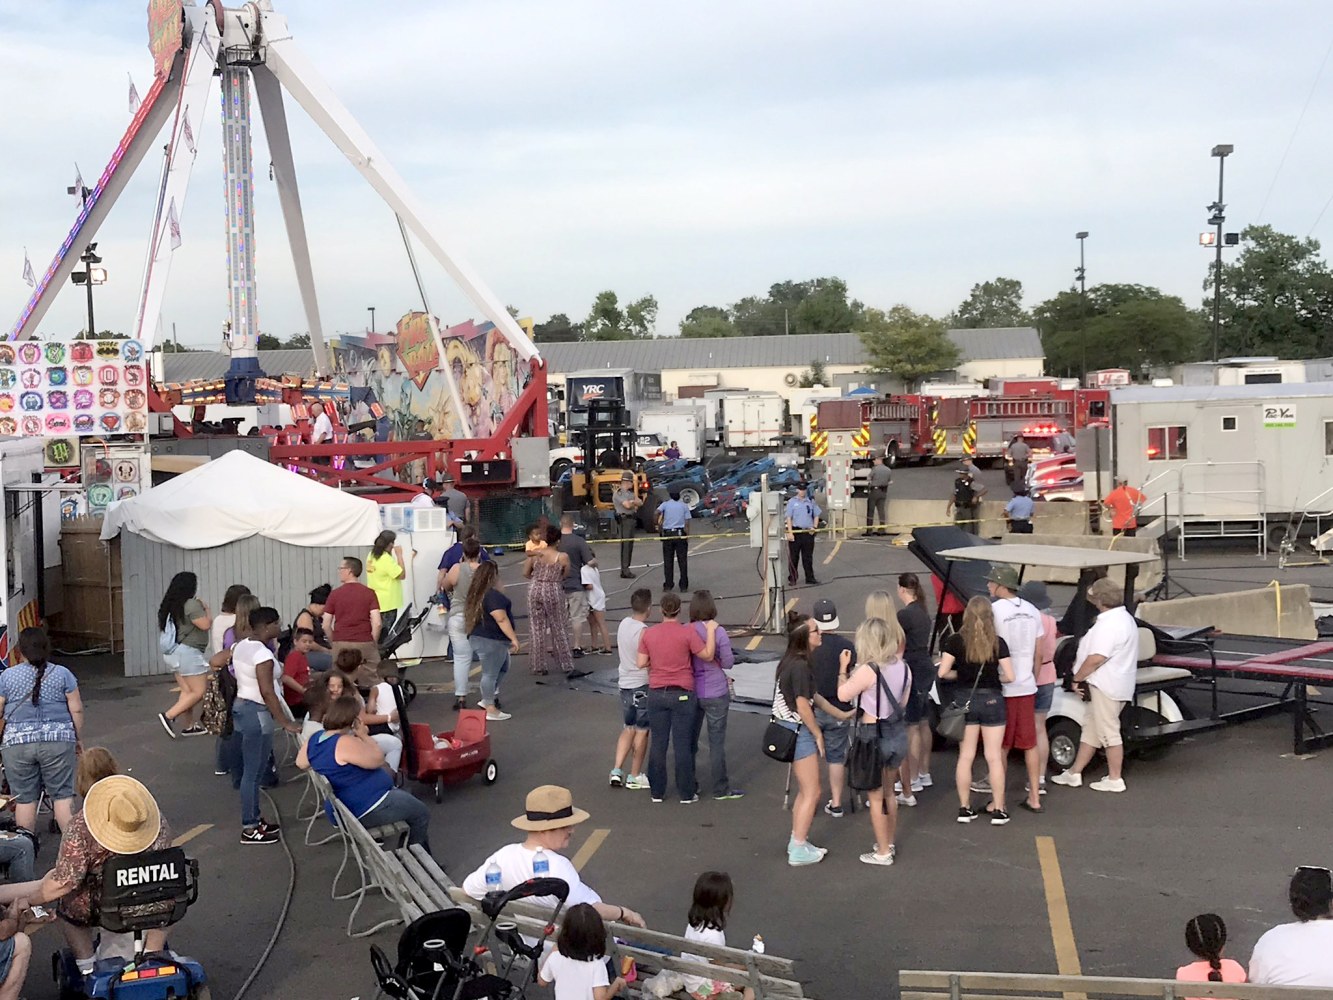 Two Rides Pulled From Greater Gulf State Fair After Ohio Tragedy